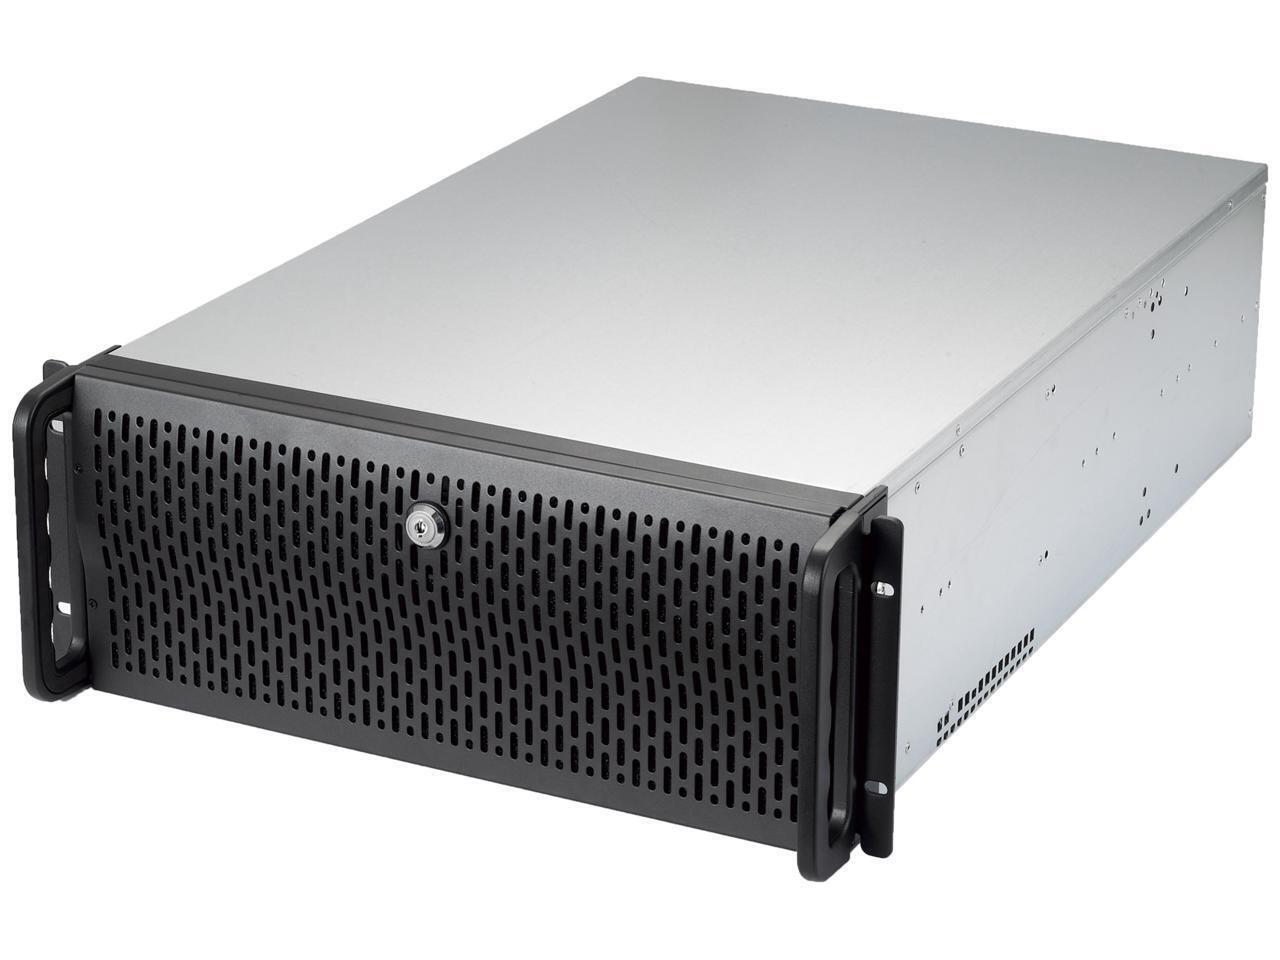 Rosewill 4U Server Chassis Rackmount Case | 15 3.5\